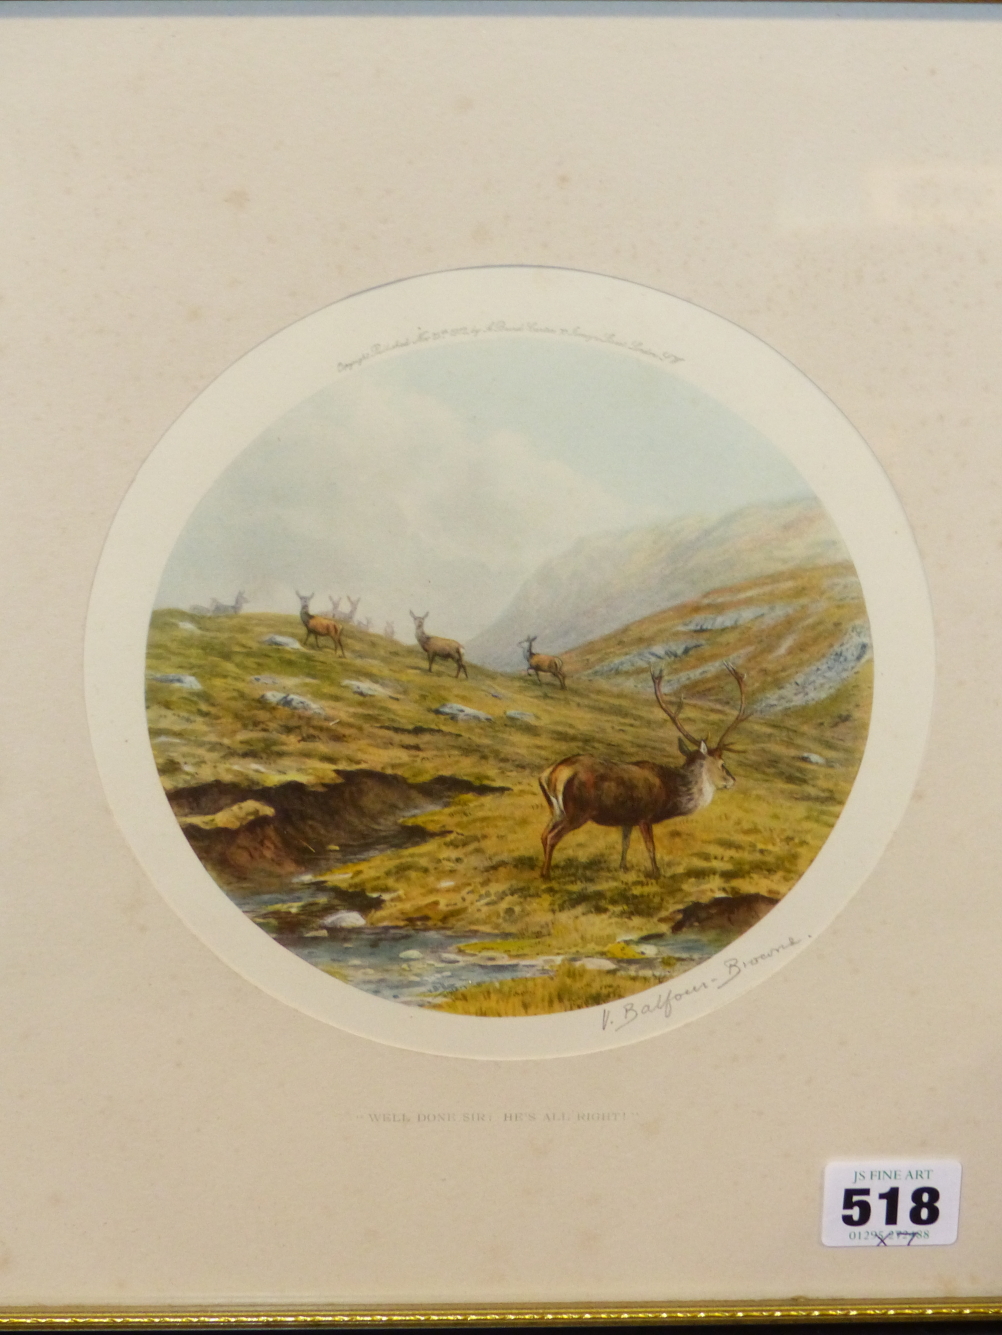 AFTER V.BALFOUR-BROWNIE. (1880-1963) SEVEN COLOUR PRINTS OF DEER IN THE HIGHLANDS, EACH PENCIL - Image 7 of 8